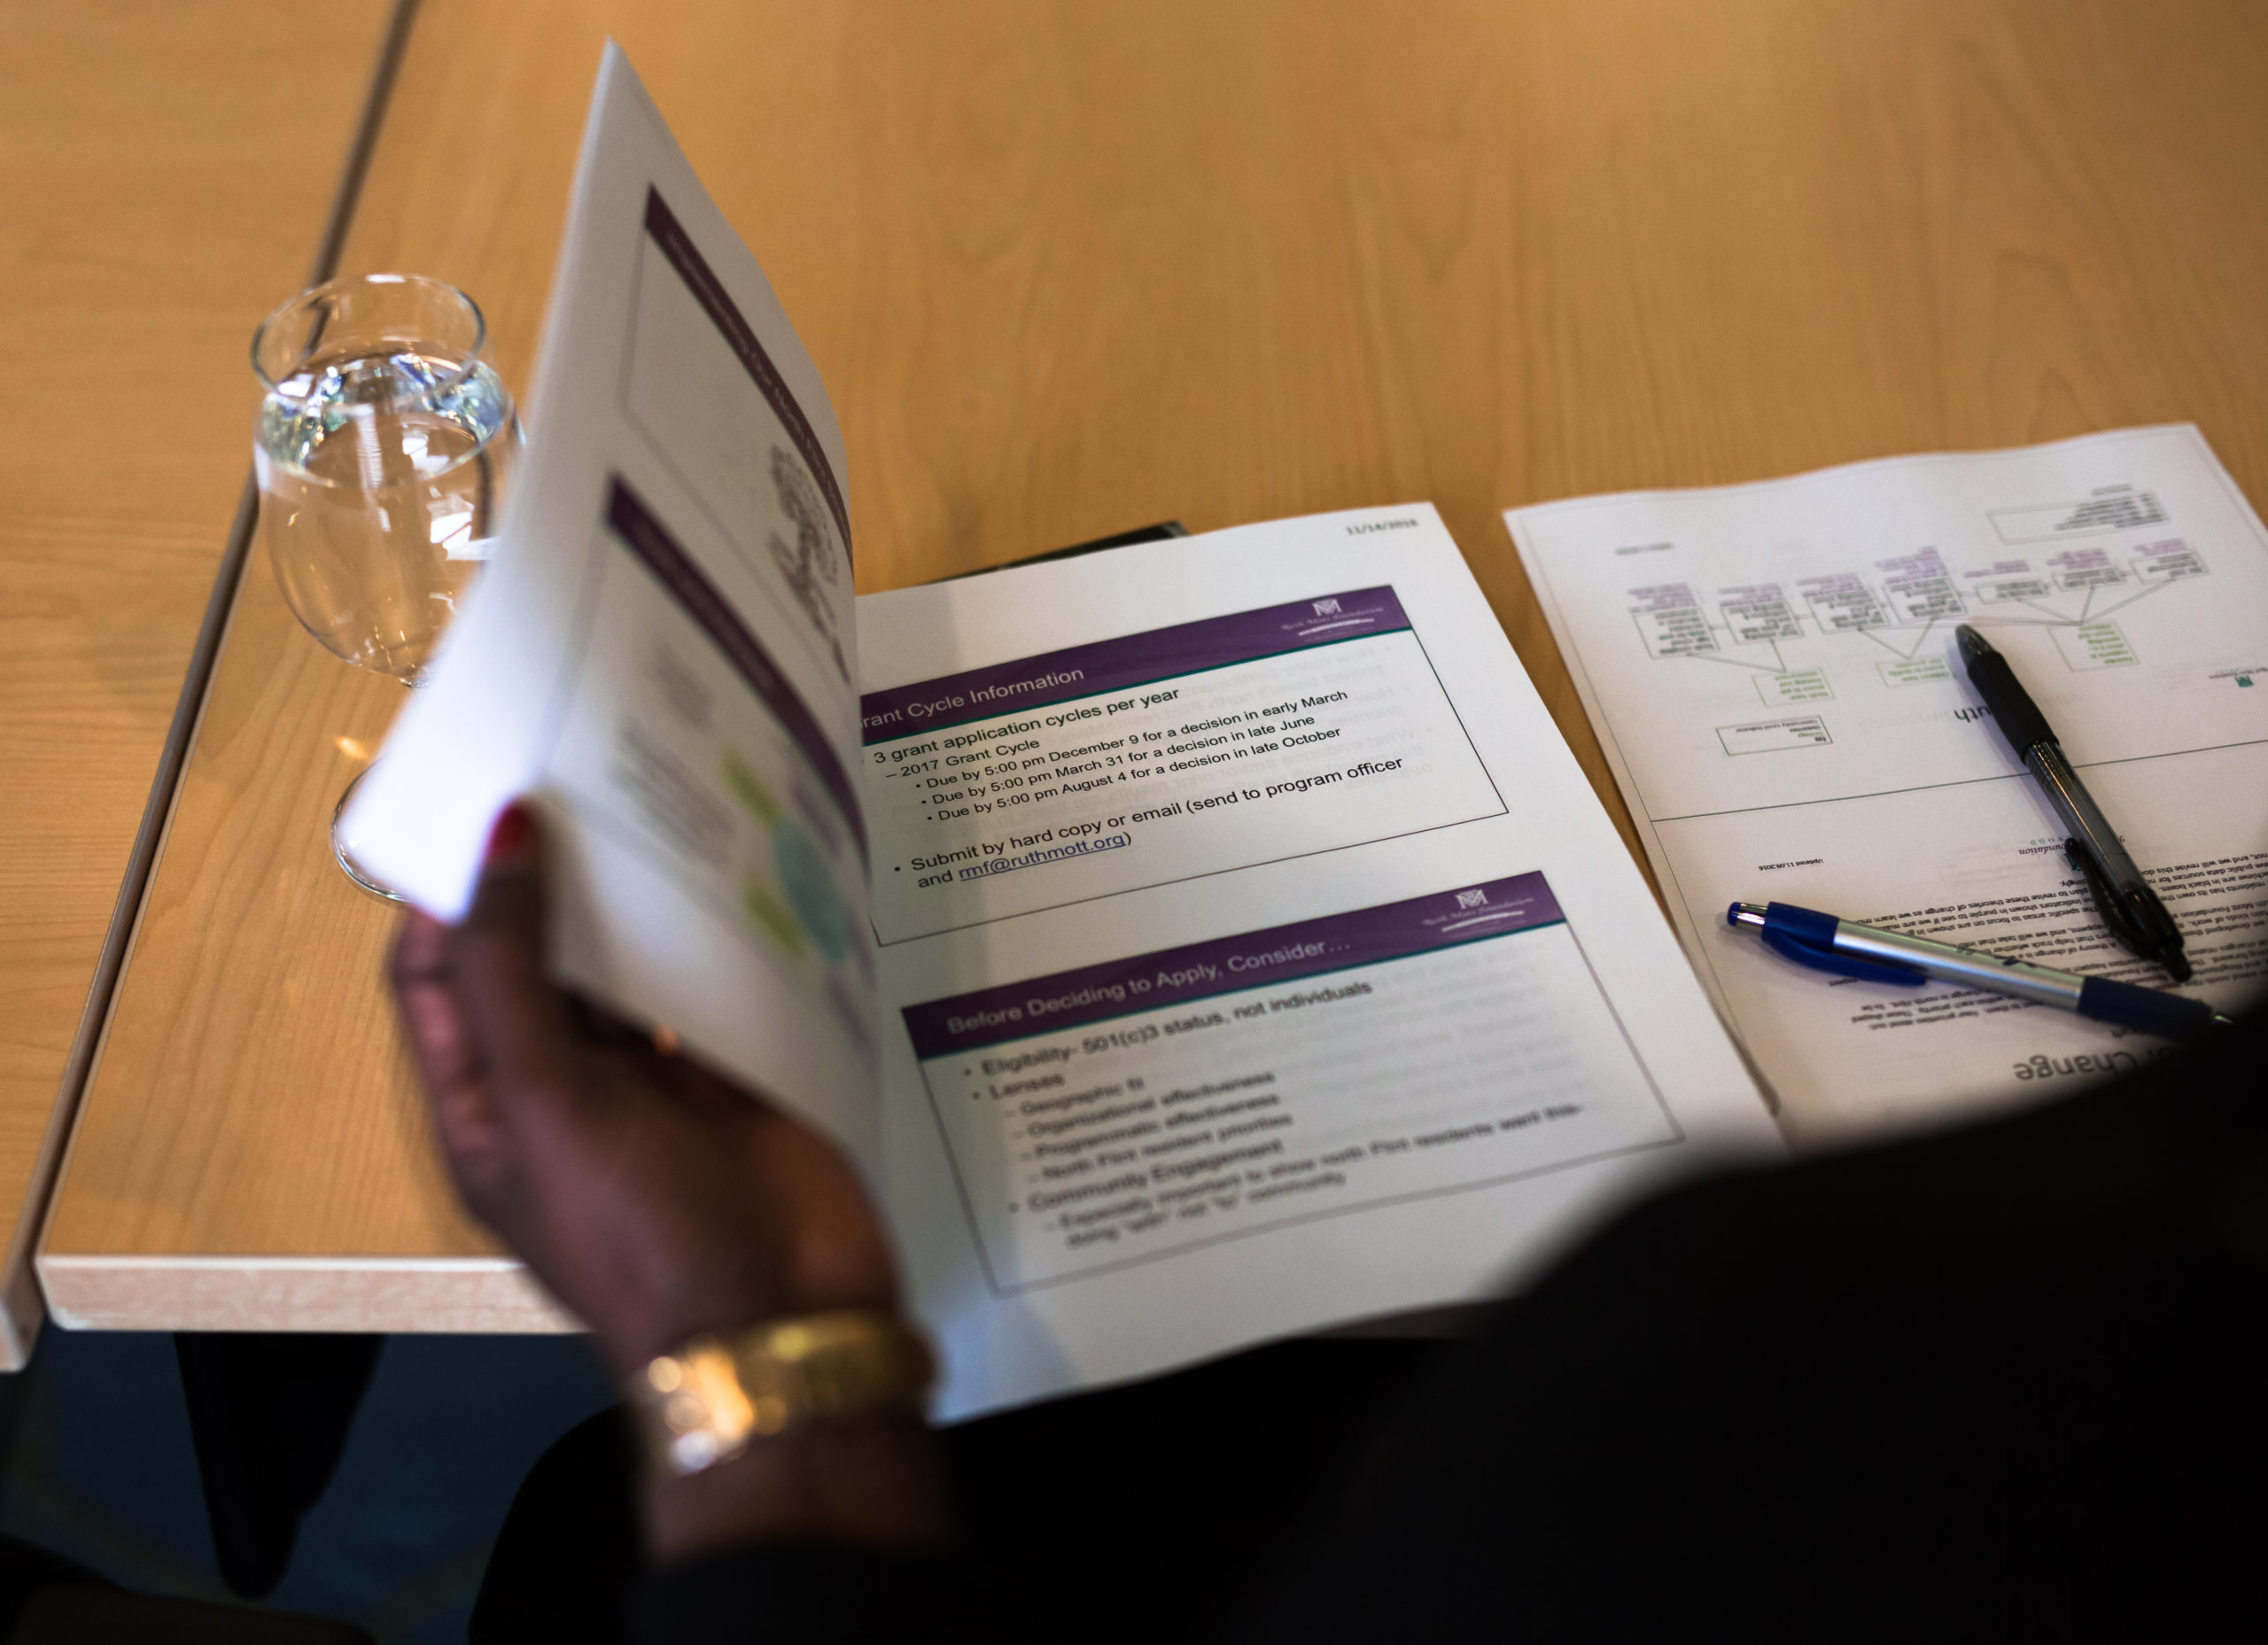 A hand is shown flipping through a stapled packet of grant guidelines on a wooden conference table.